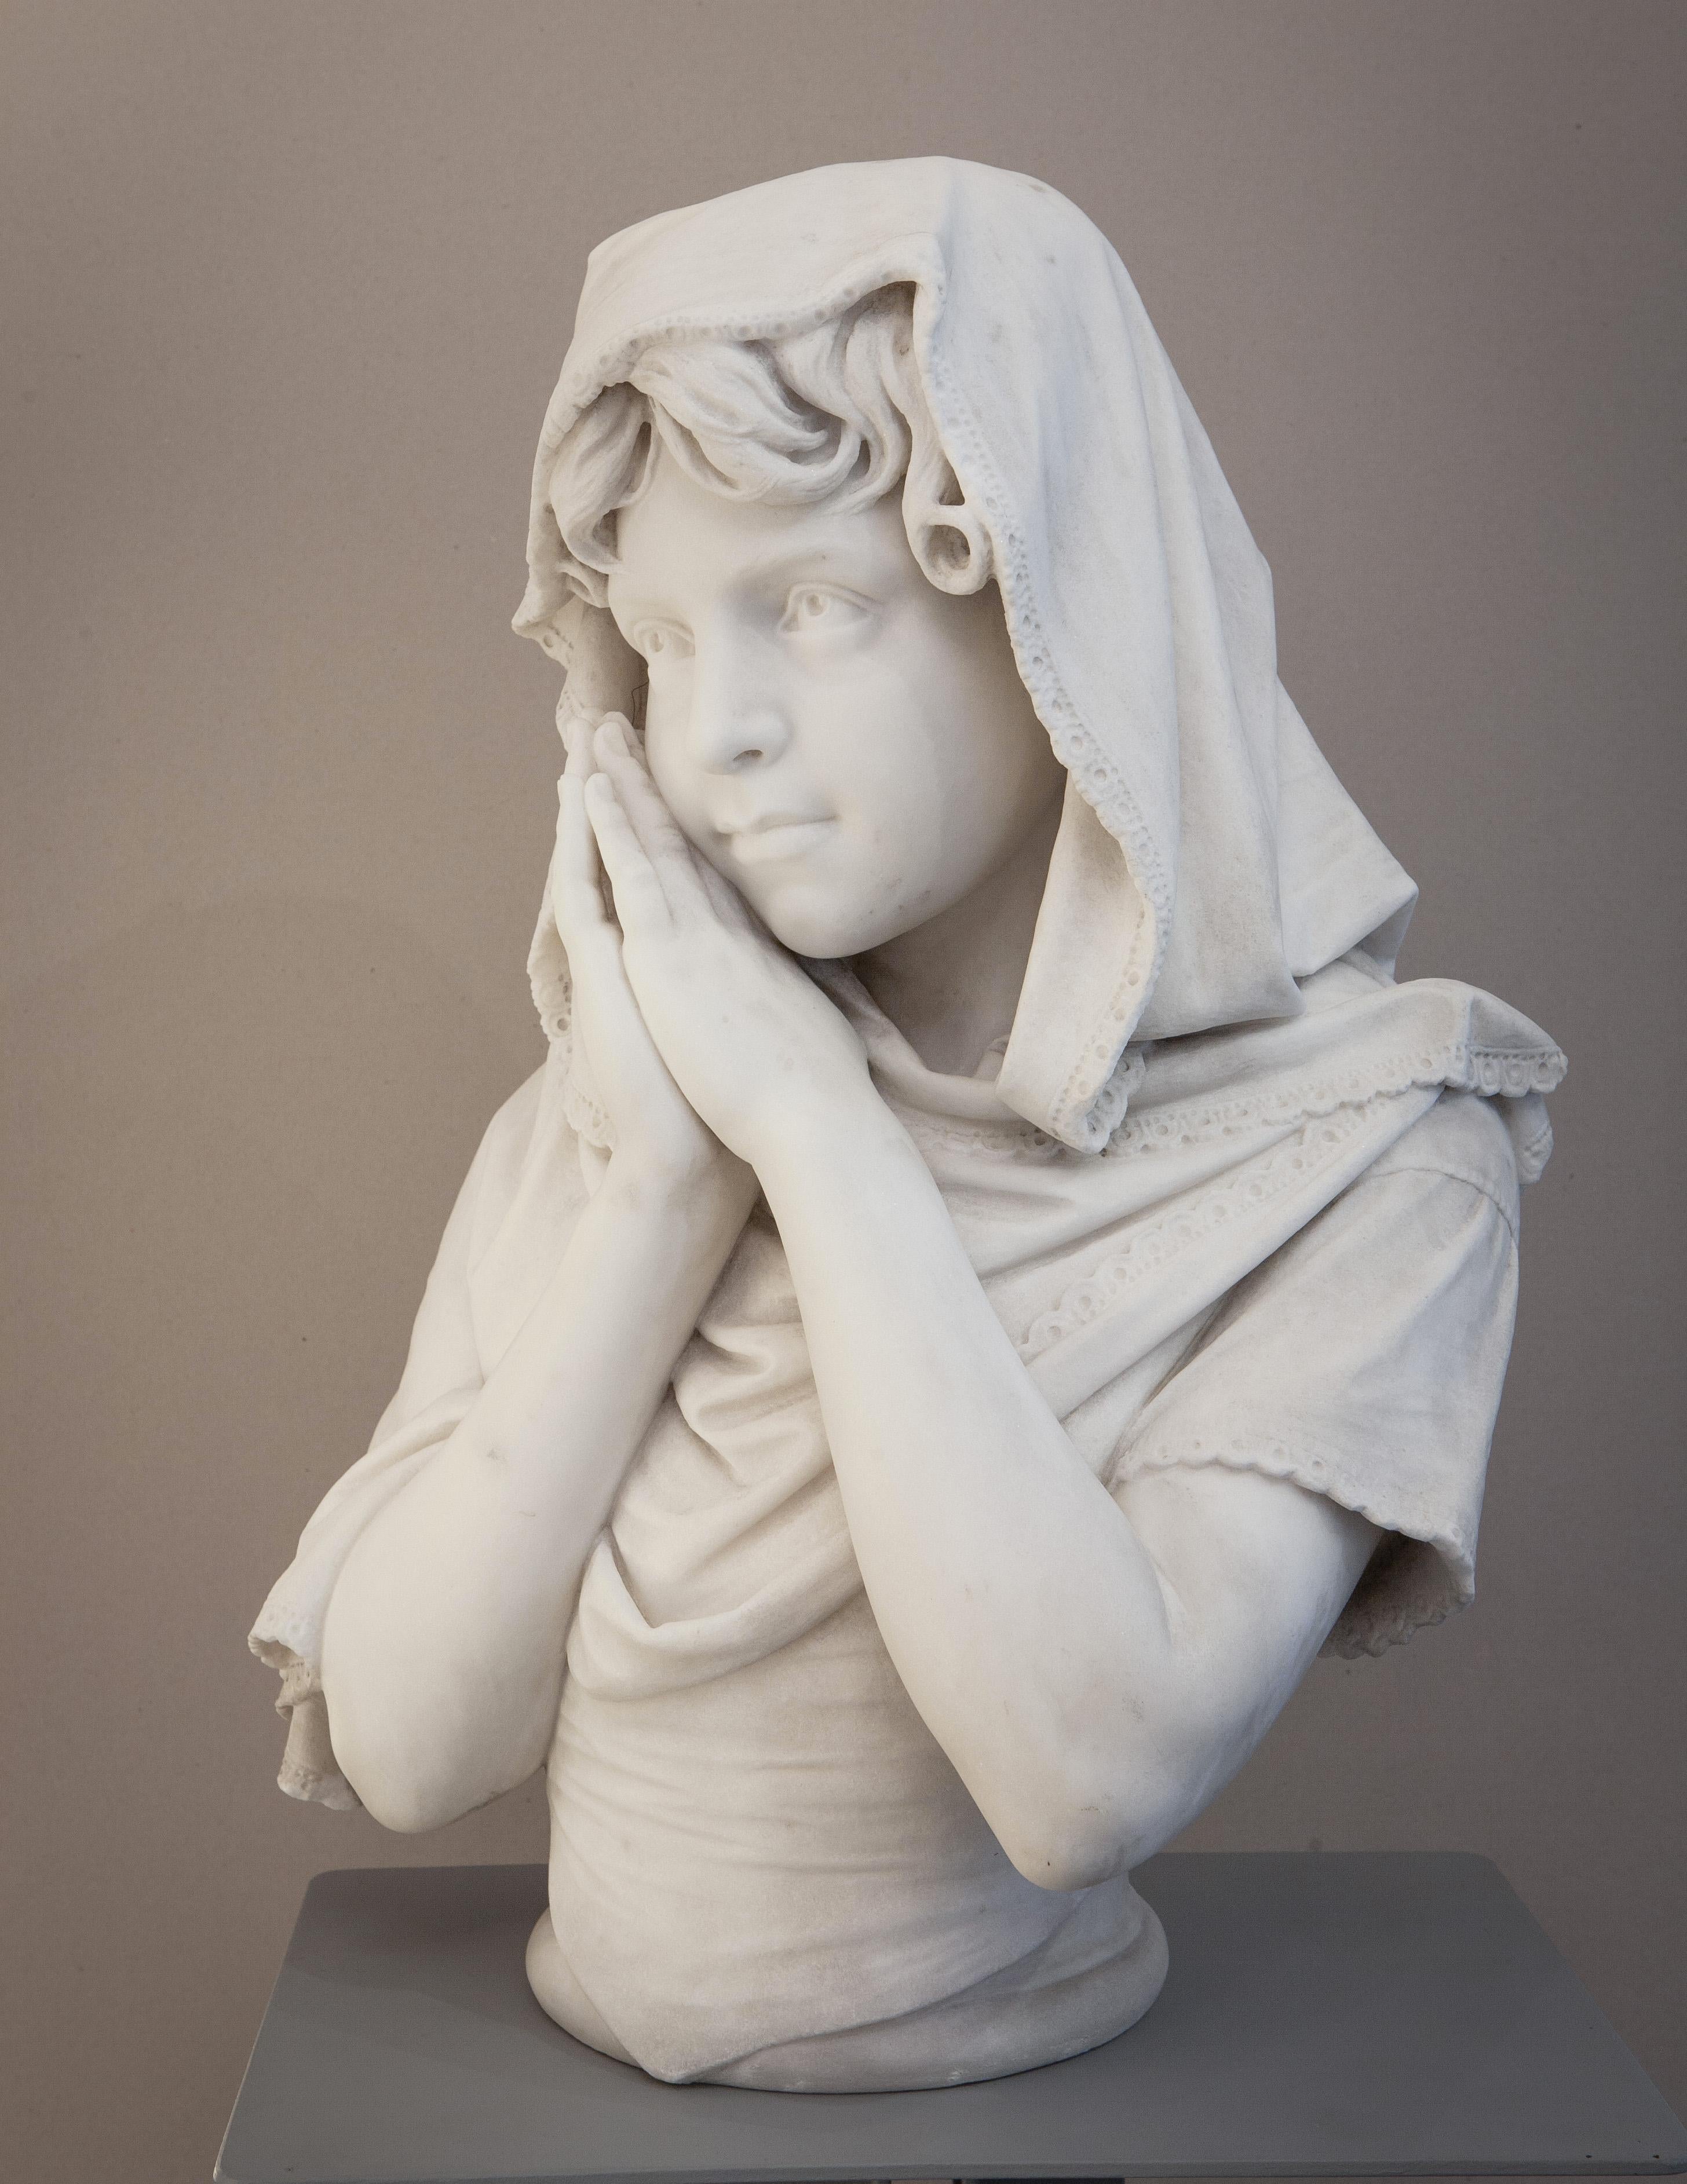 Little girl with clasped hands - Sculpture by Donato Barcaglia (1849 – 1930)